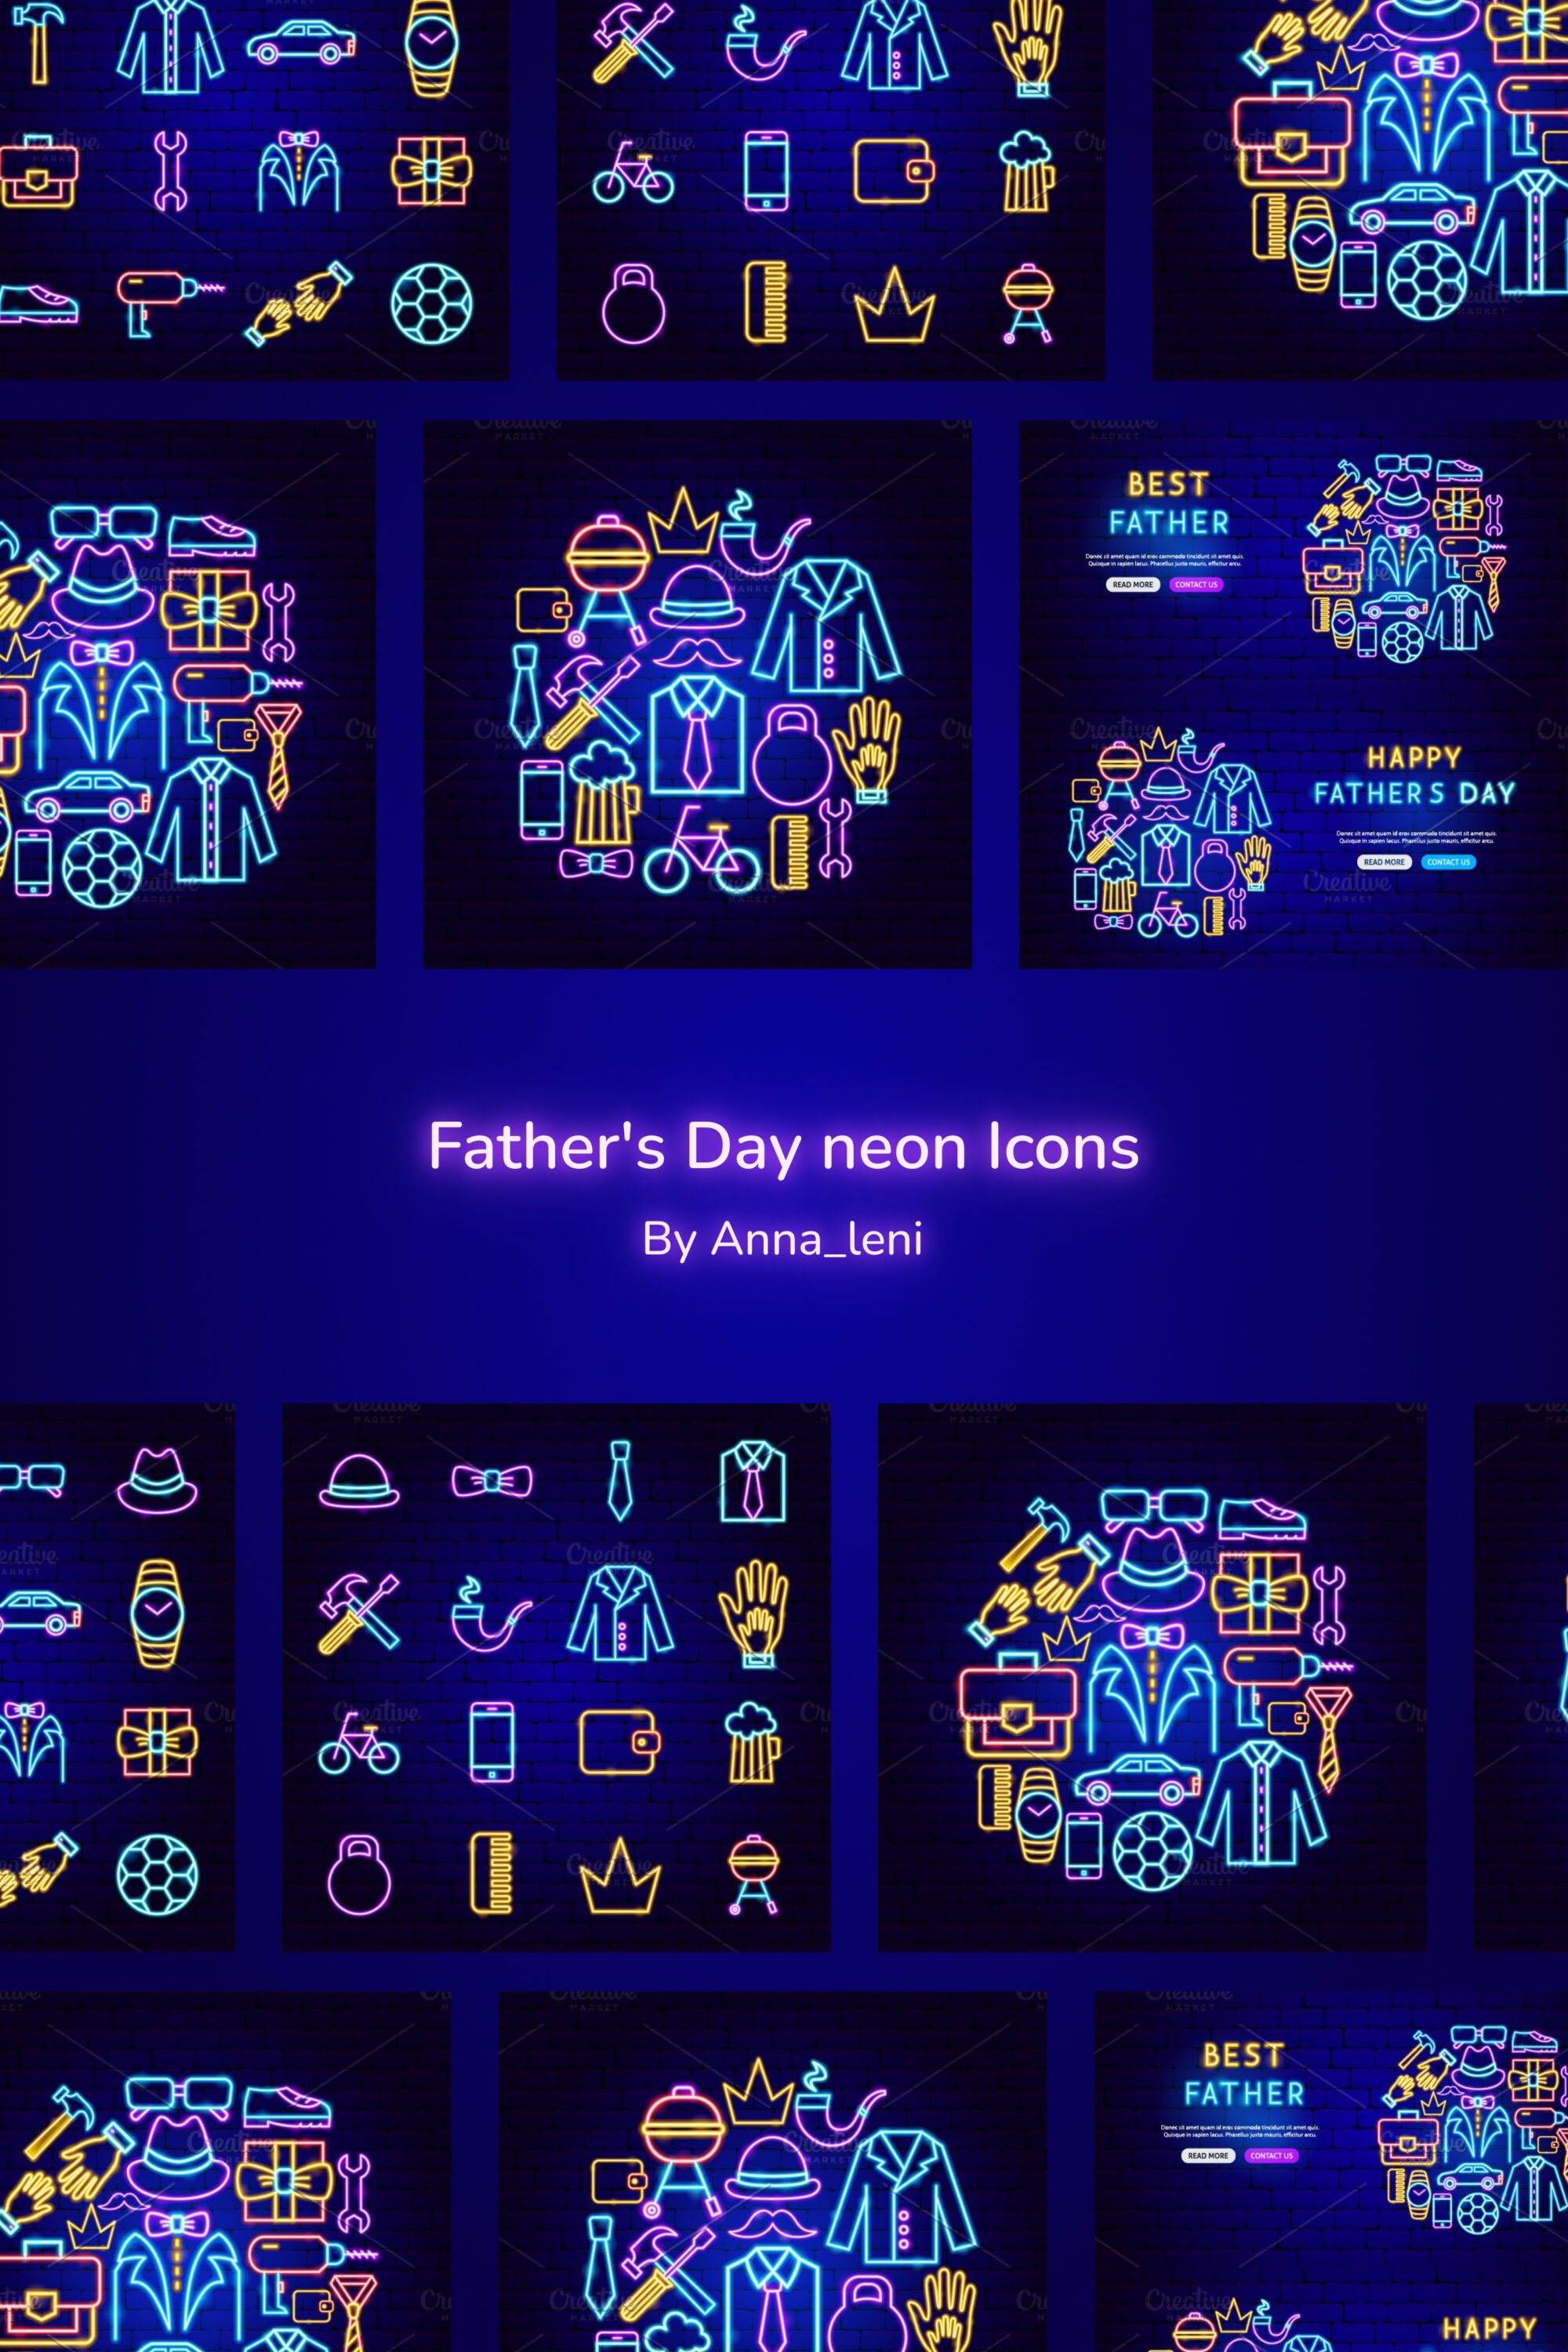 Fathers day neon icons of pinterest.